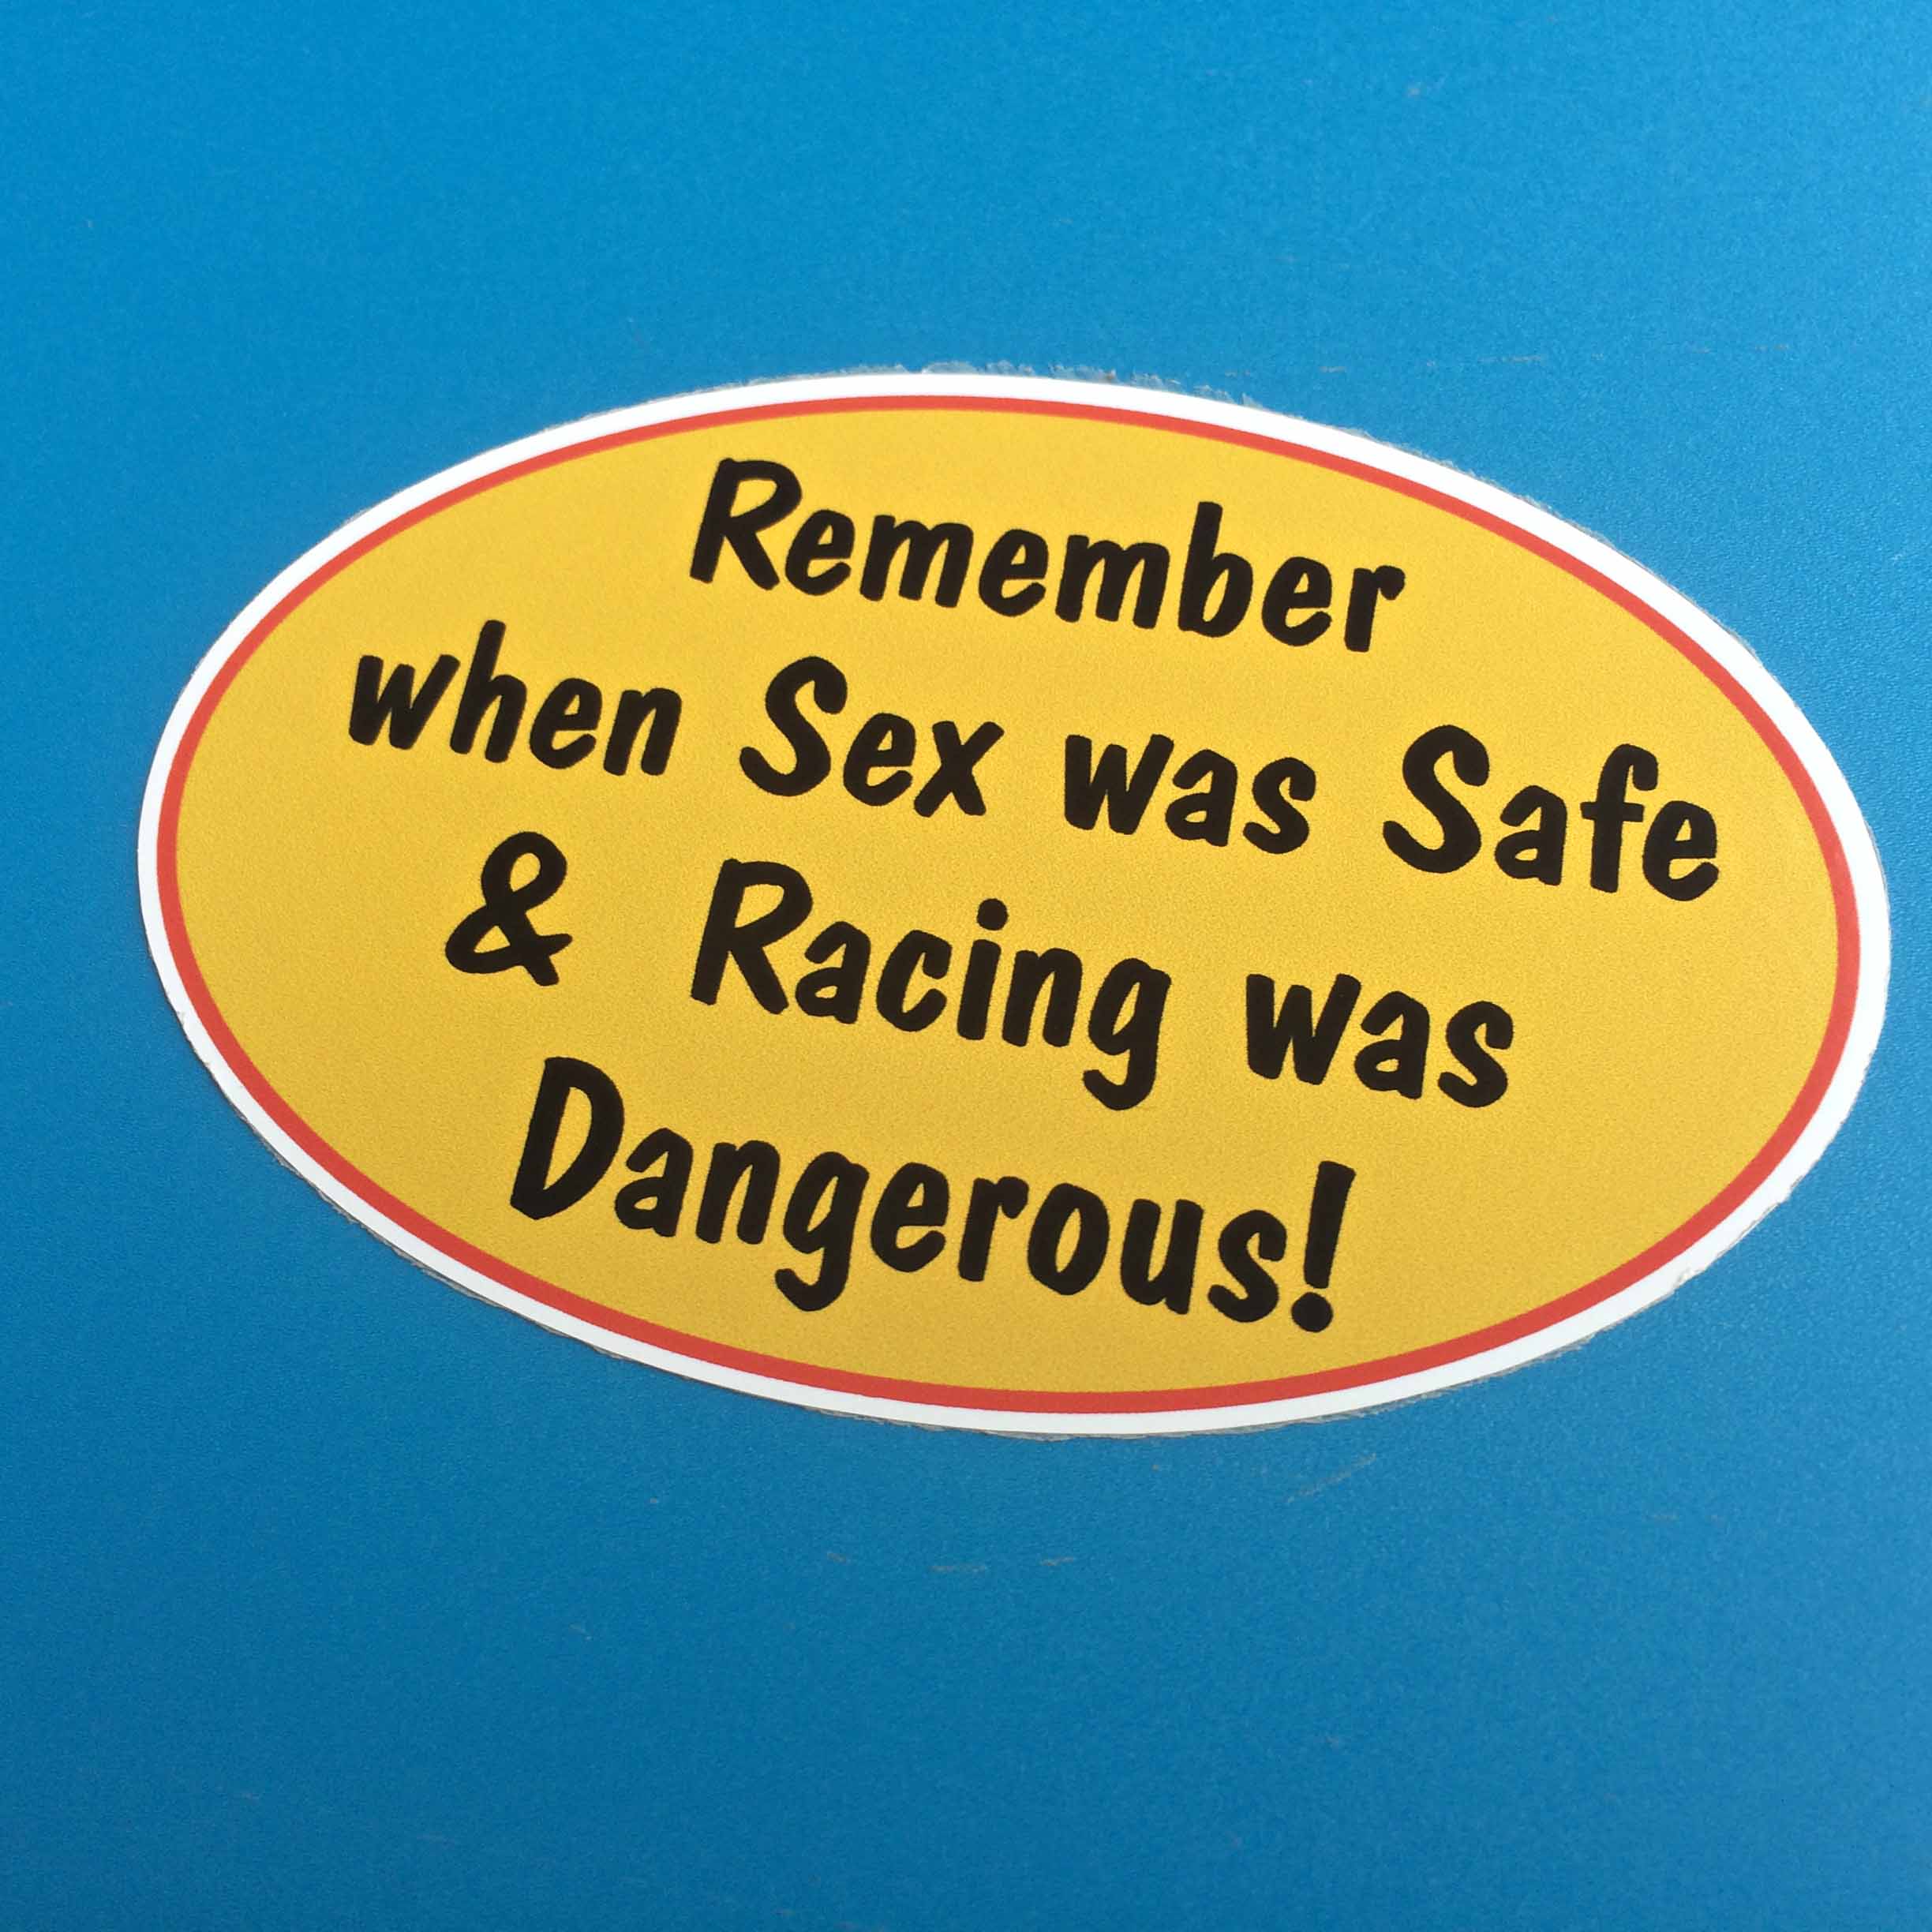 Remember when Sex was Safe & Racing was Dangerous! Black lettering on a yellow oval background with a red border.